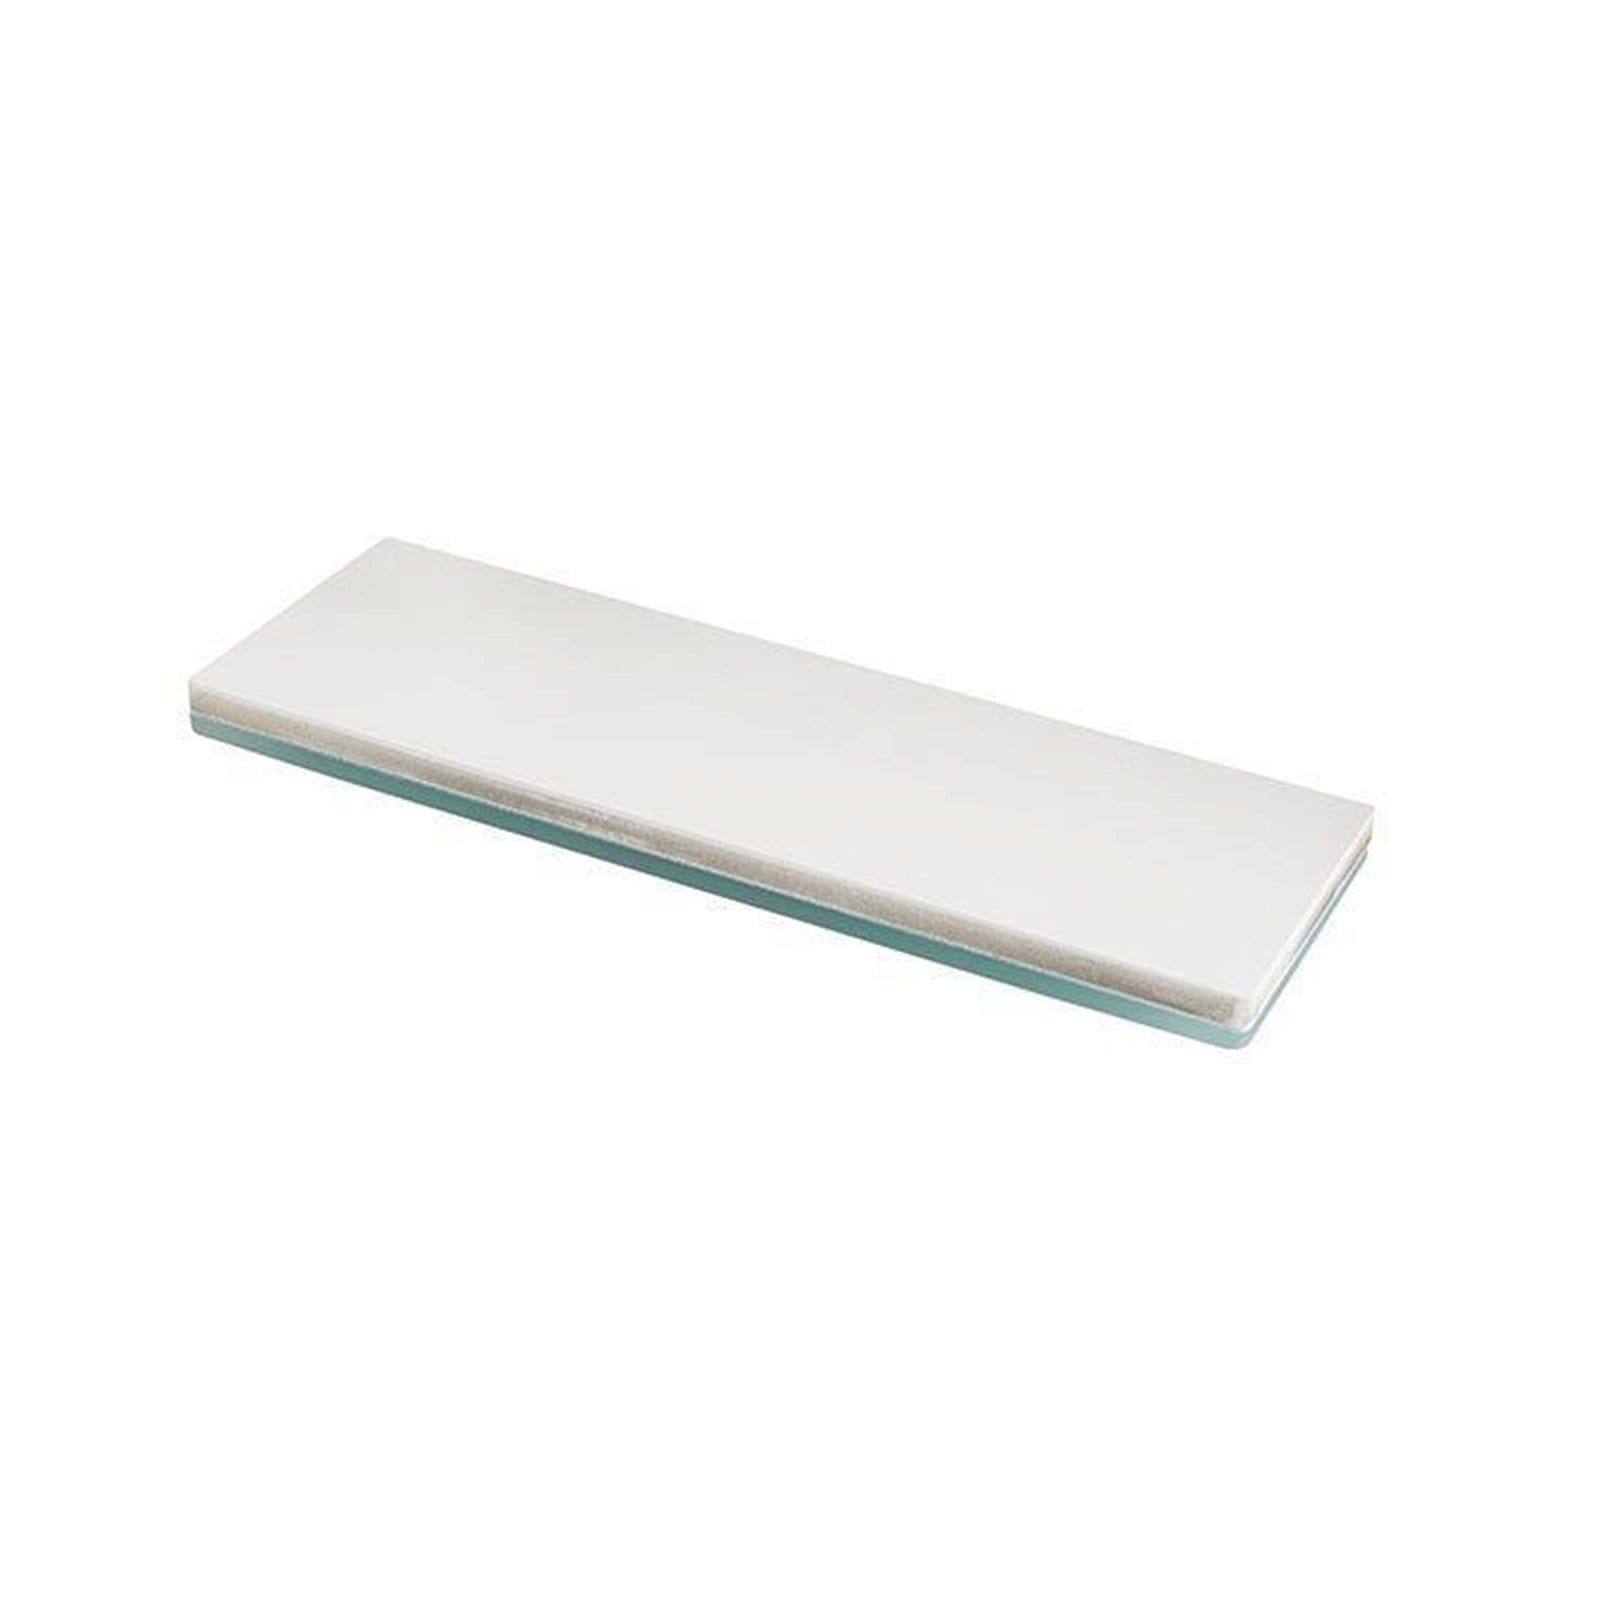 \\$25 OFF - Shapton® Glass Stone 6000 Grit 5mm